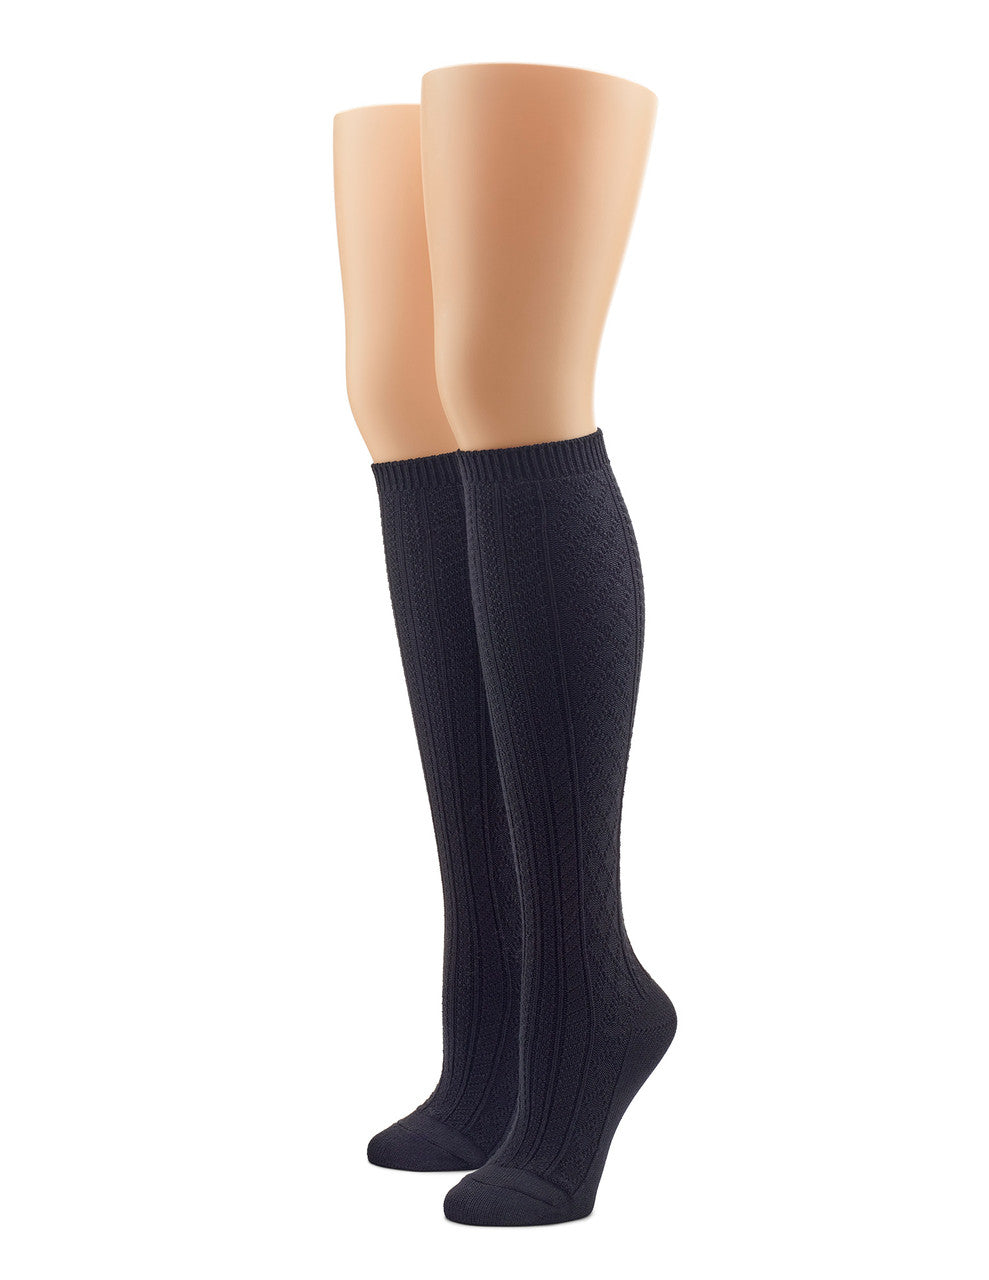 Cable Super Soft Knee Sock